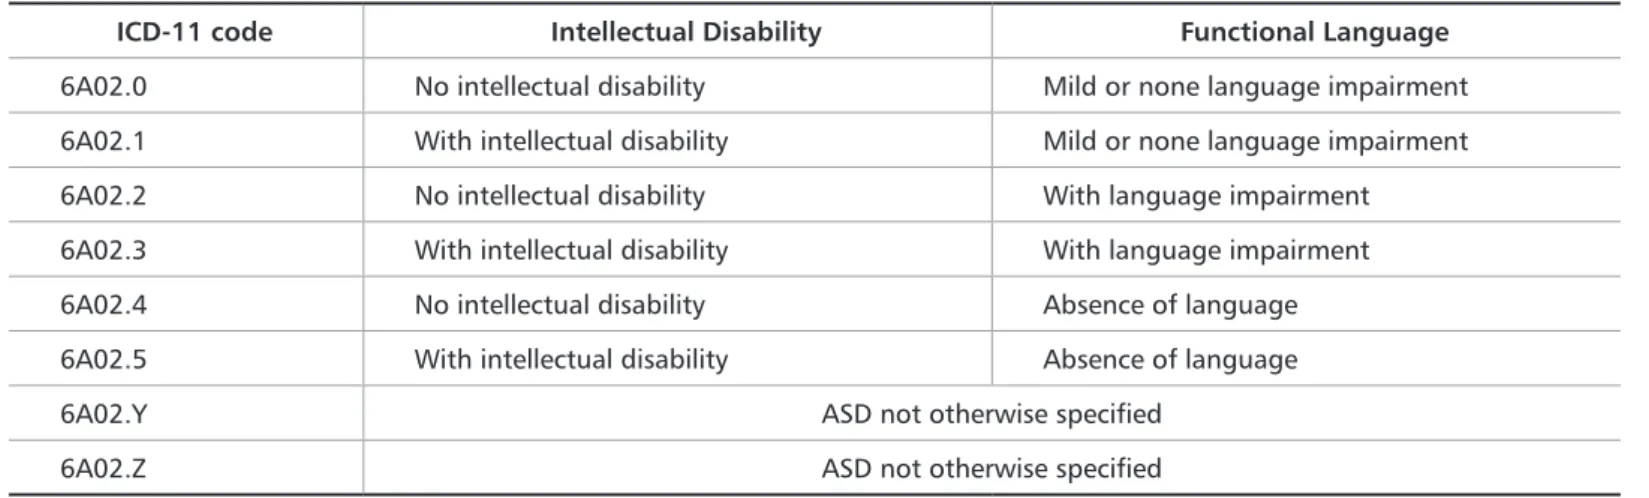 Table 2. Classification of ASD according to ICD - 11